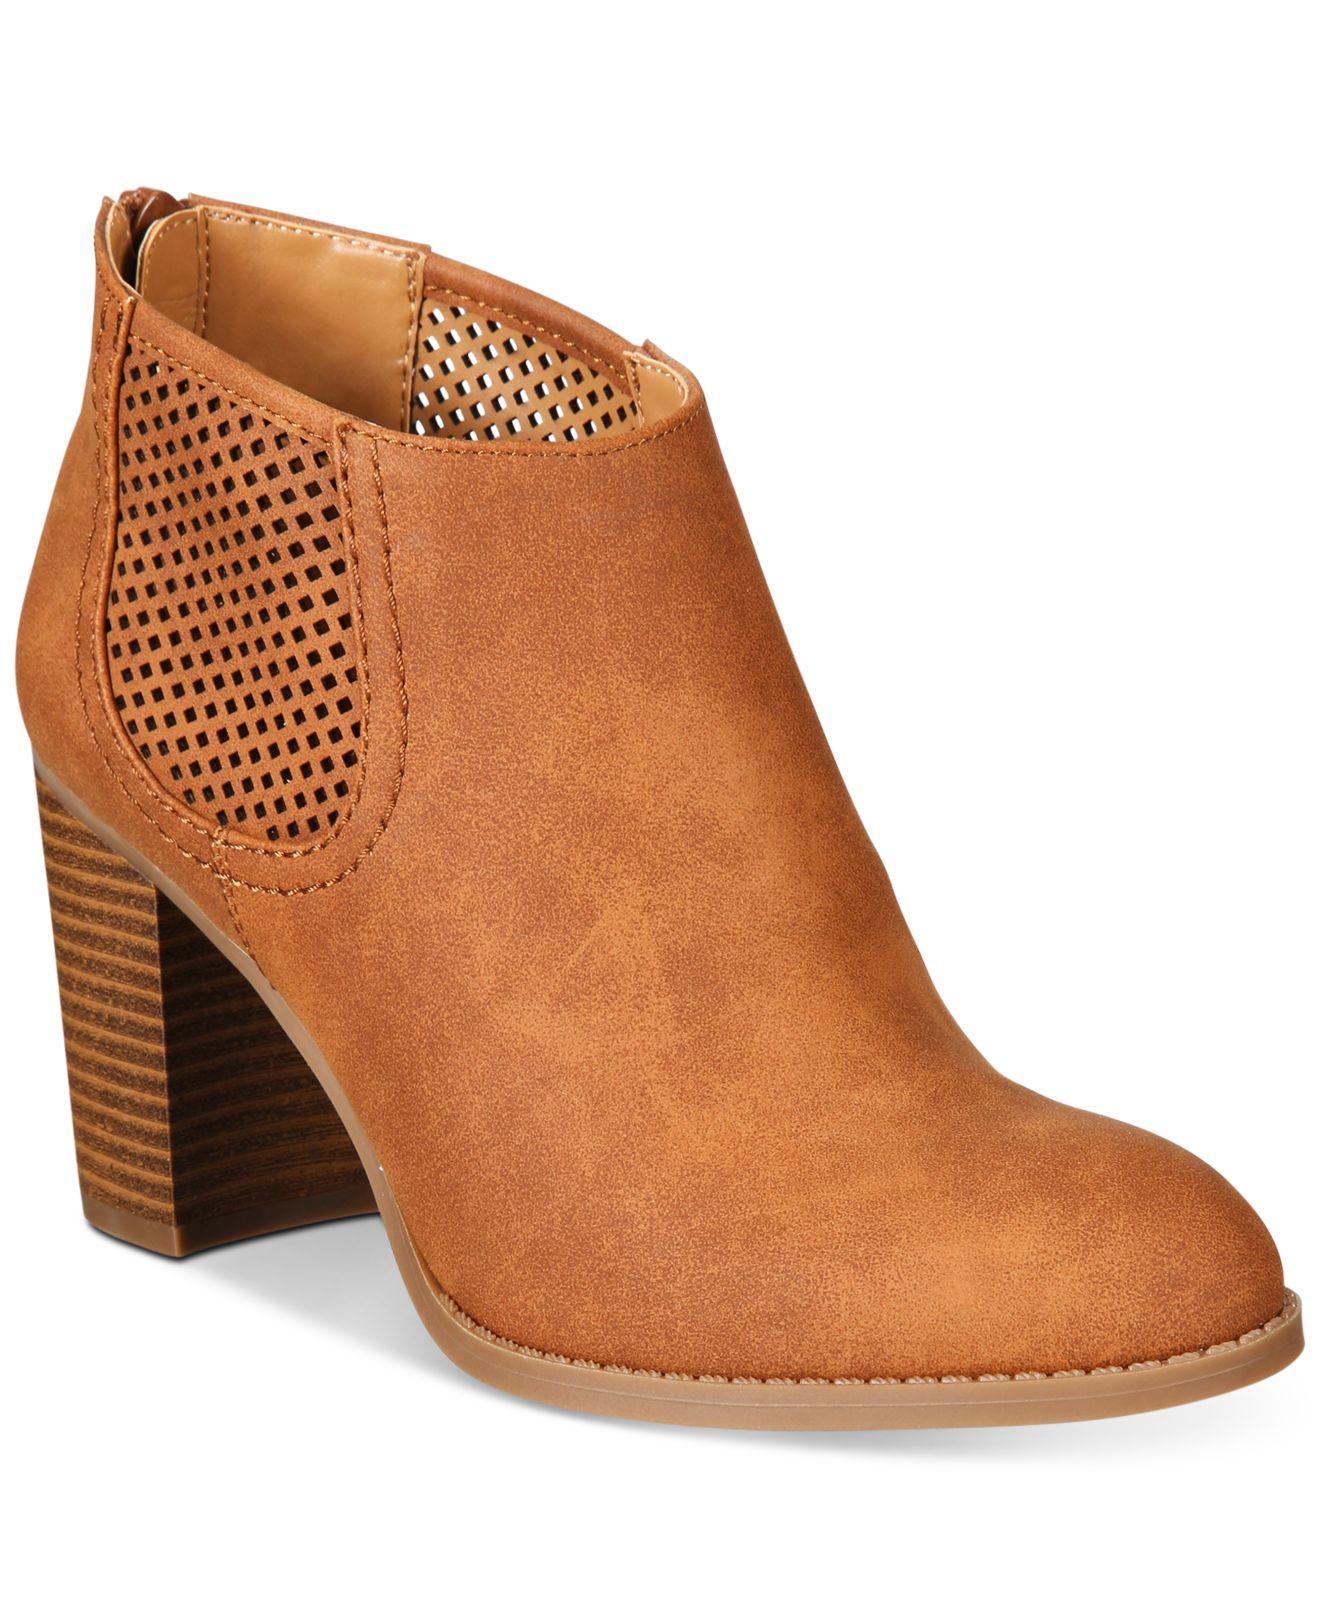 Lyst - Style & co. Women&#39;s Lanaa Perforated Booties in Brown